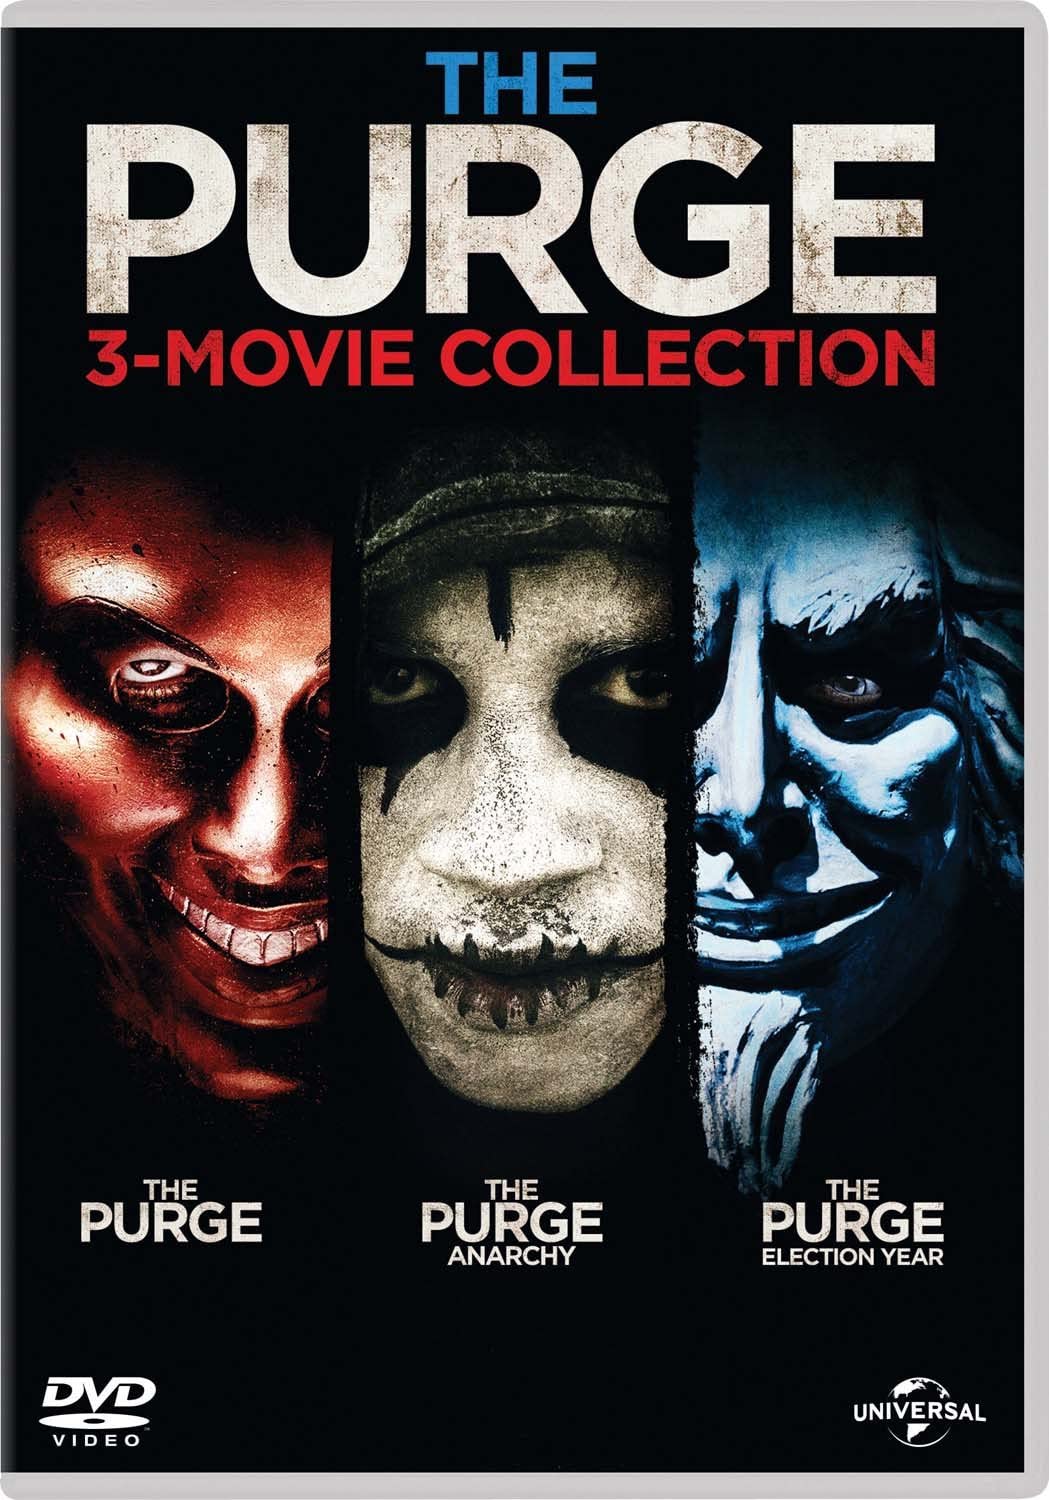 The Purge – 3 Movie Collection – Horror/Thriller [DVD]